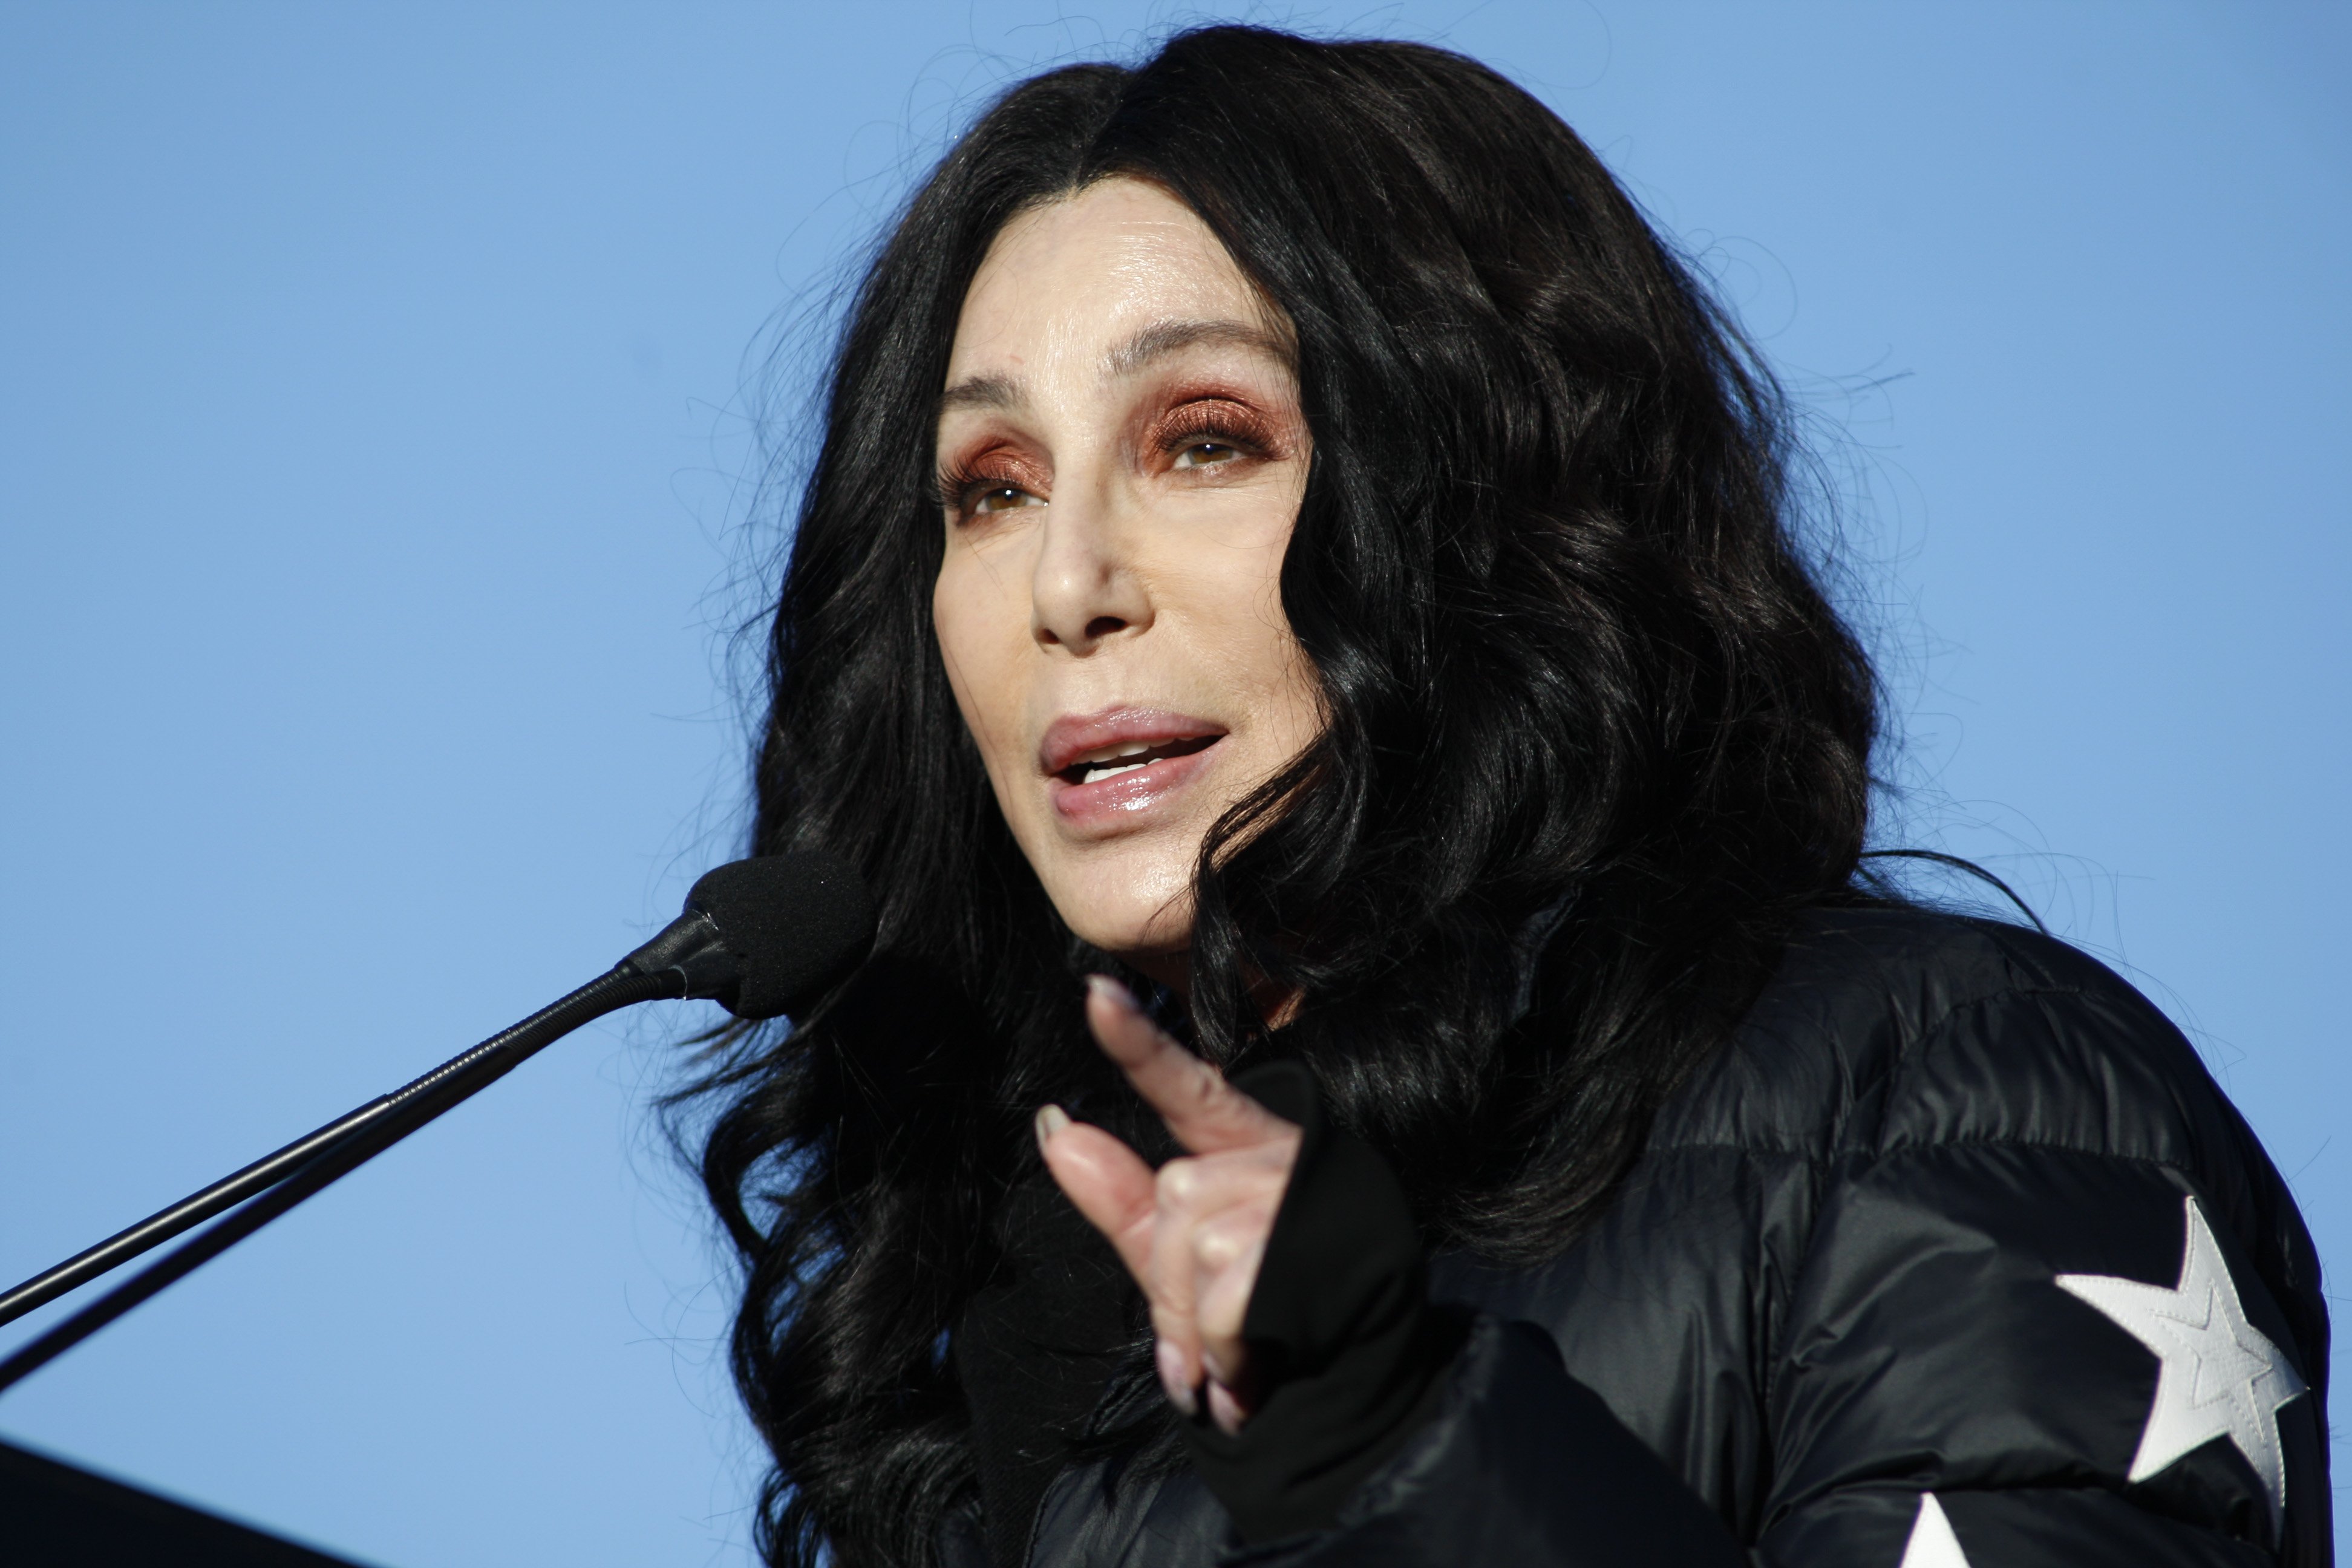 Actress Cher speaks during the Women's March "Power to the Polls" voter registration tour launch at Sam Boyd Stadium on January 21, 2018, in Las Vegas, Nevada | Photo: Getty Images